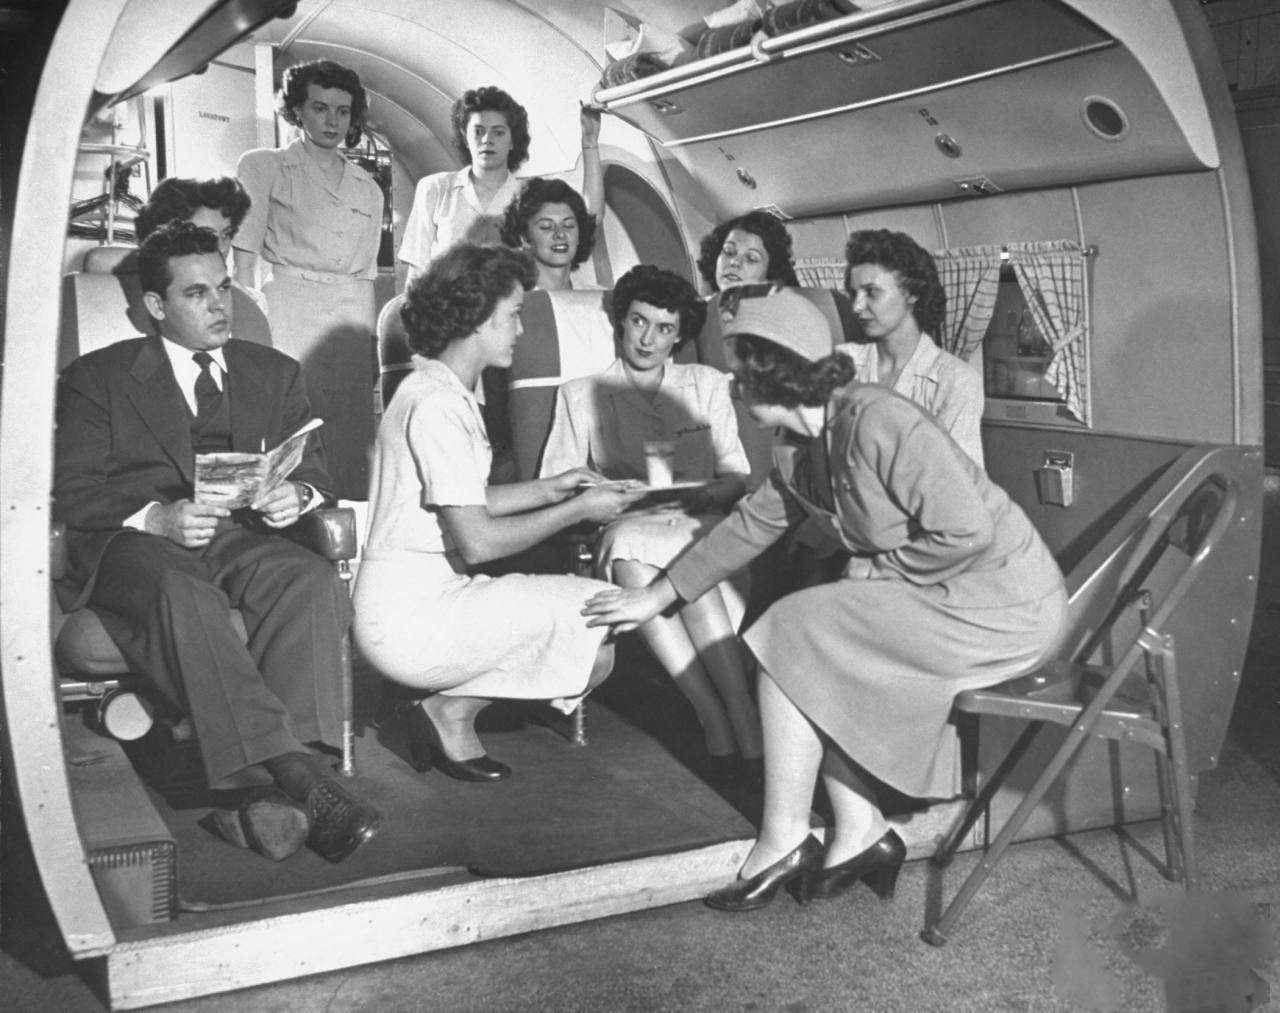 Students at the McConnell Air Hostess School learning the right and wrong ways to serve passengers.